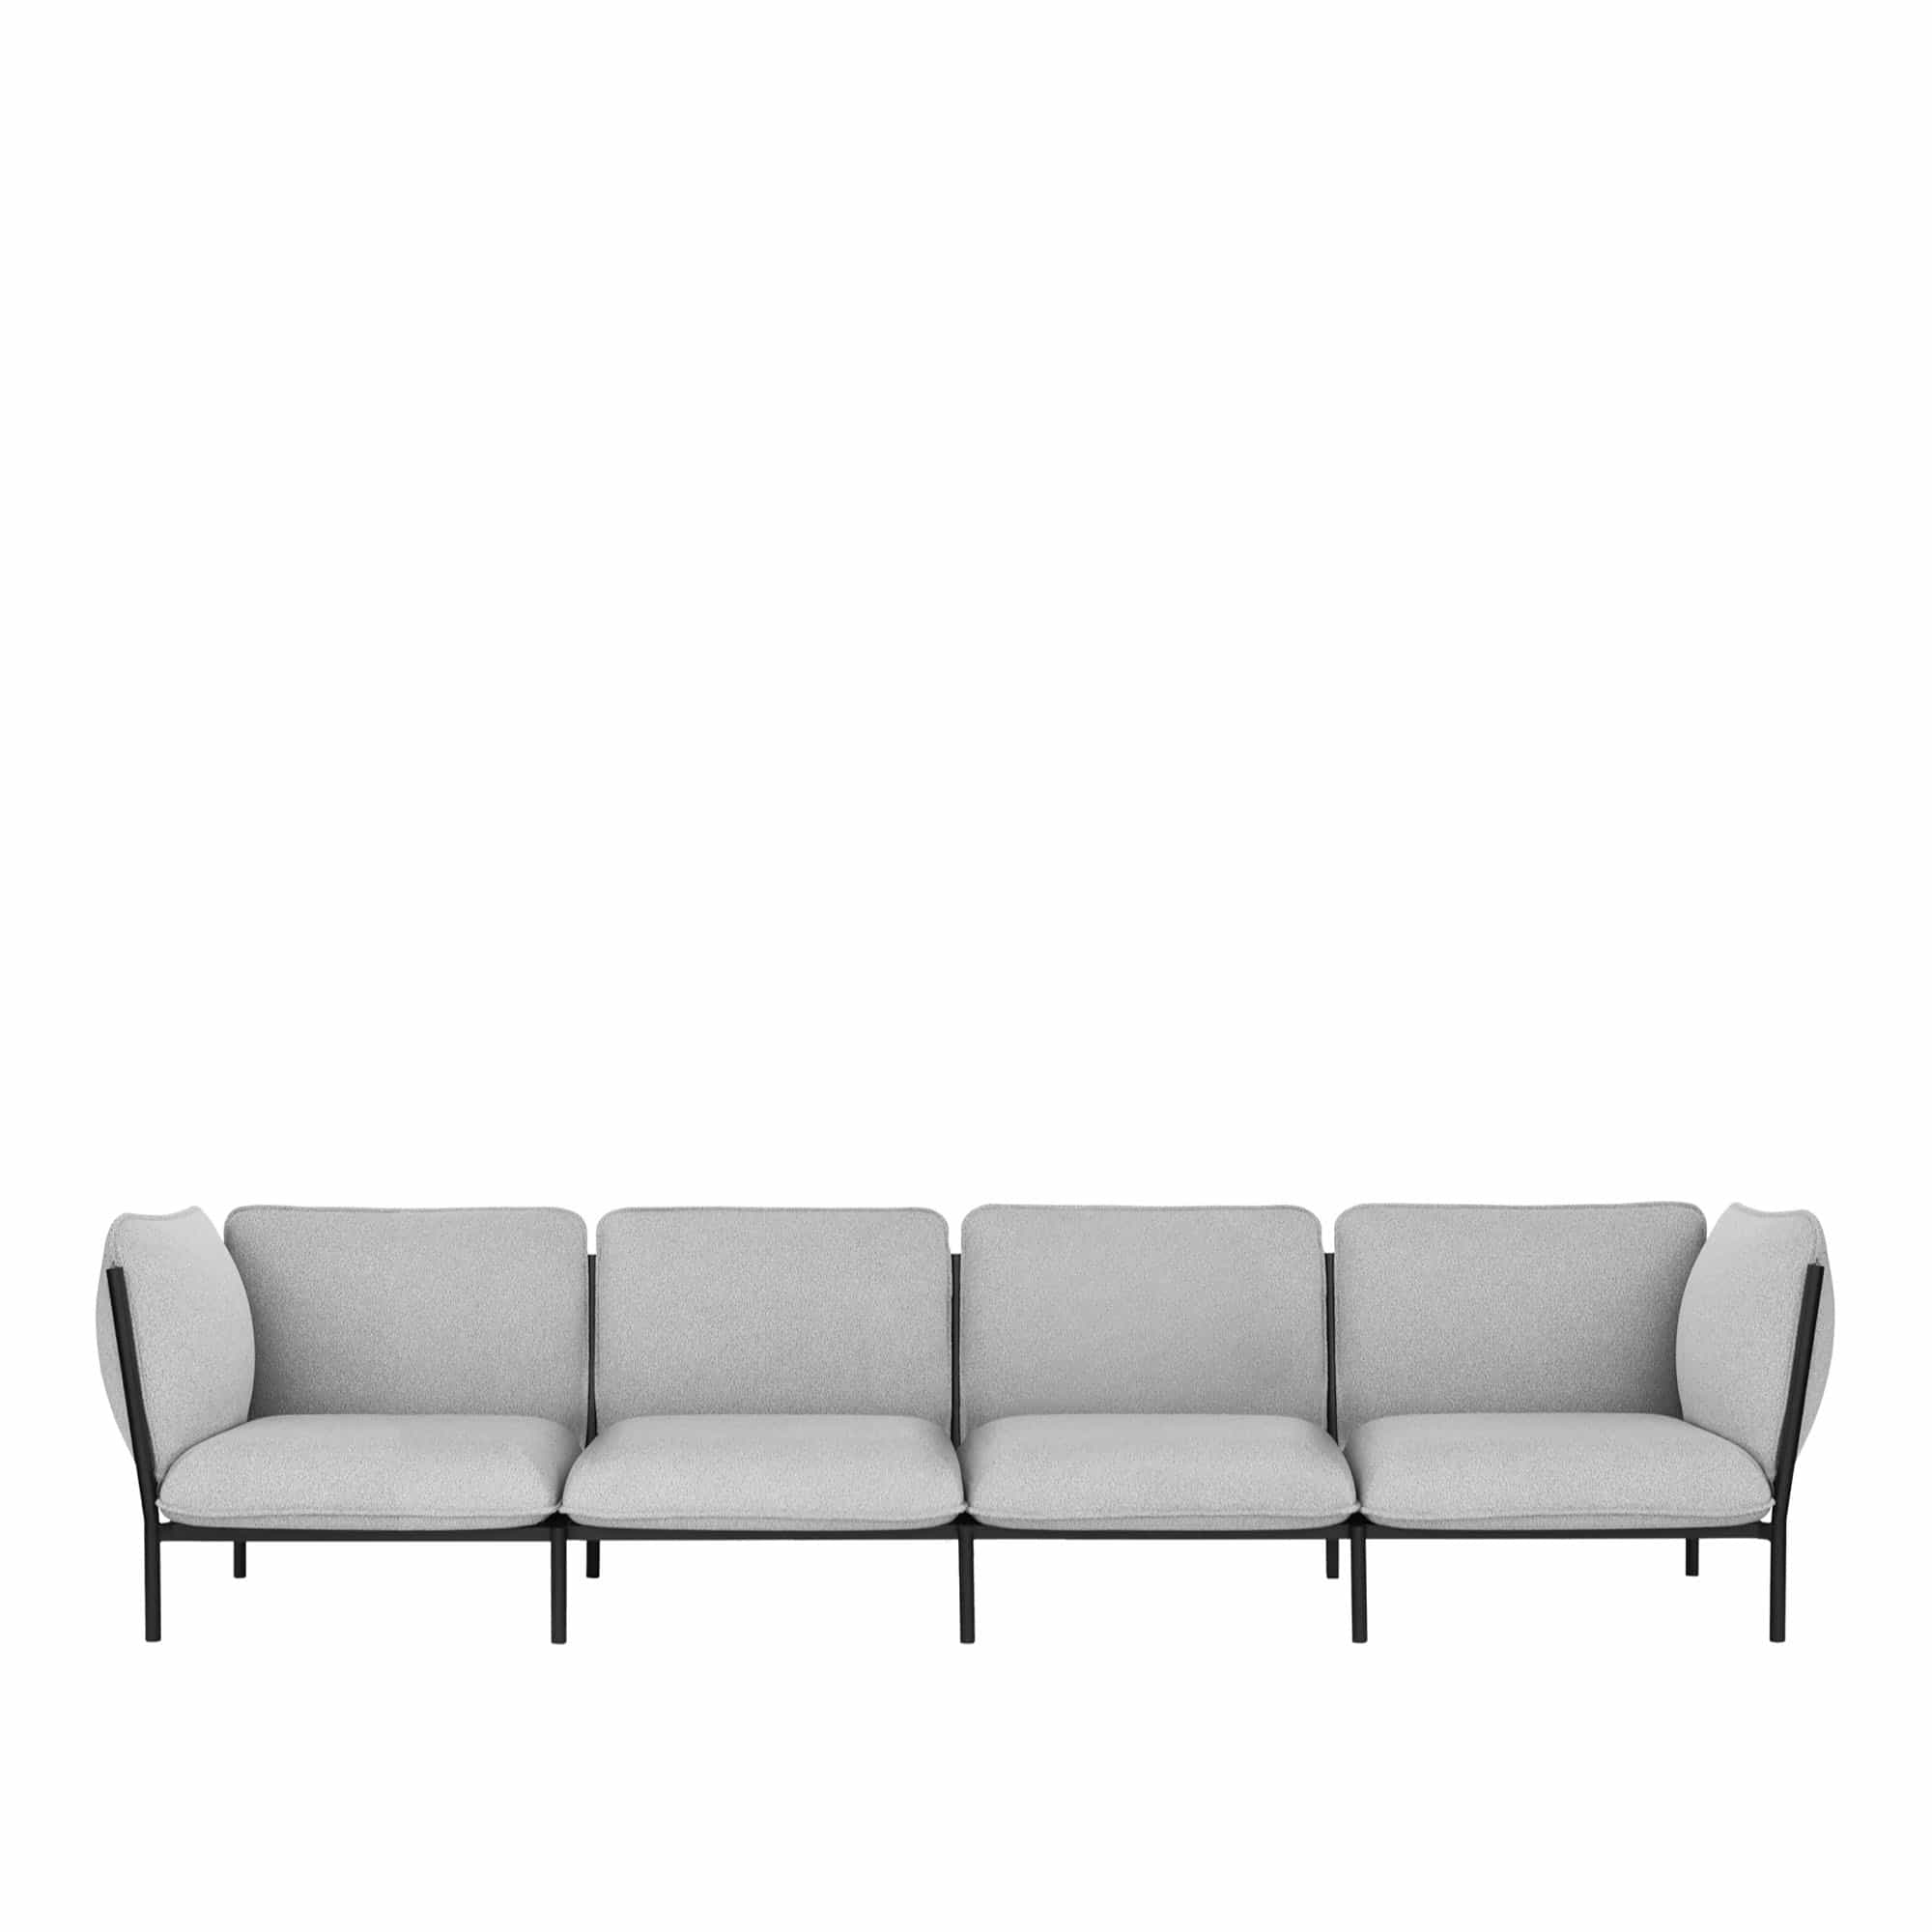 Kumo 4-seater Sofa with Armrests